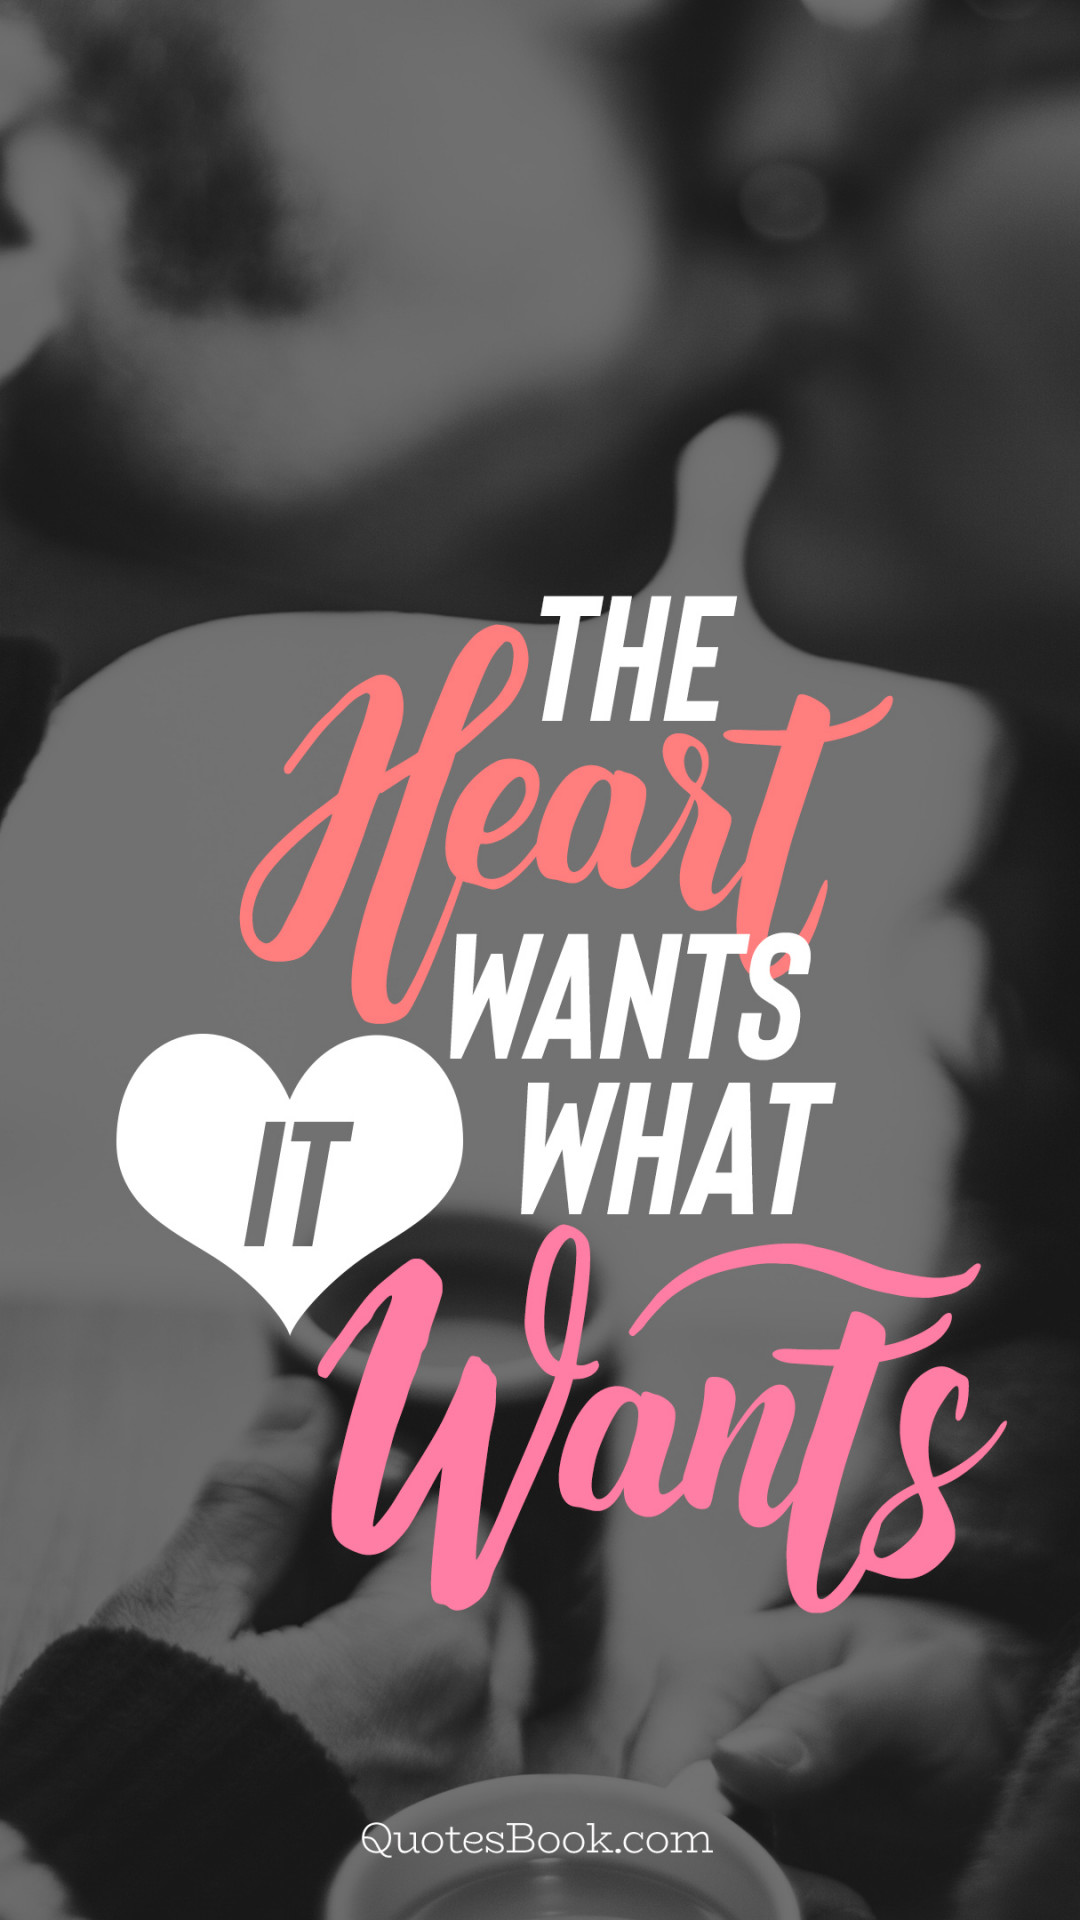 The heart wants what it wants - QuotesBook